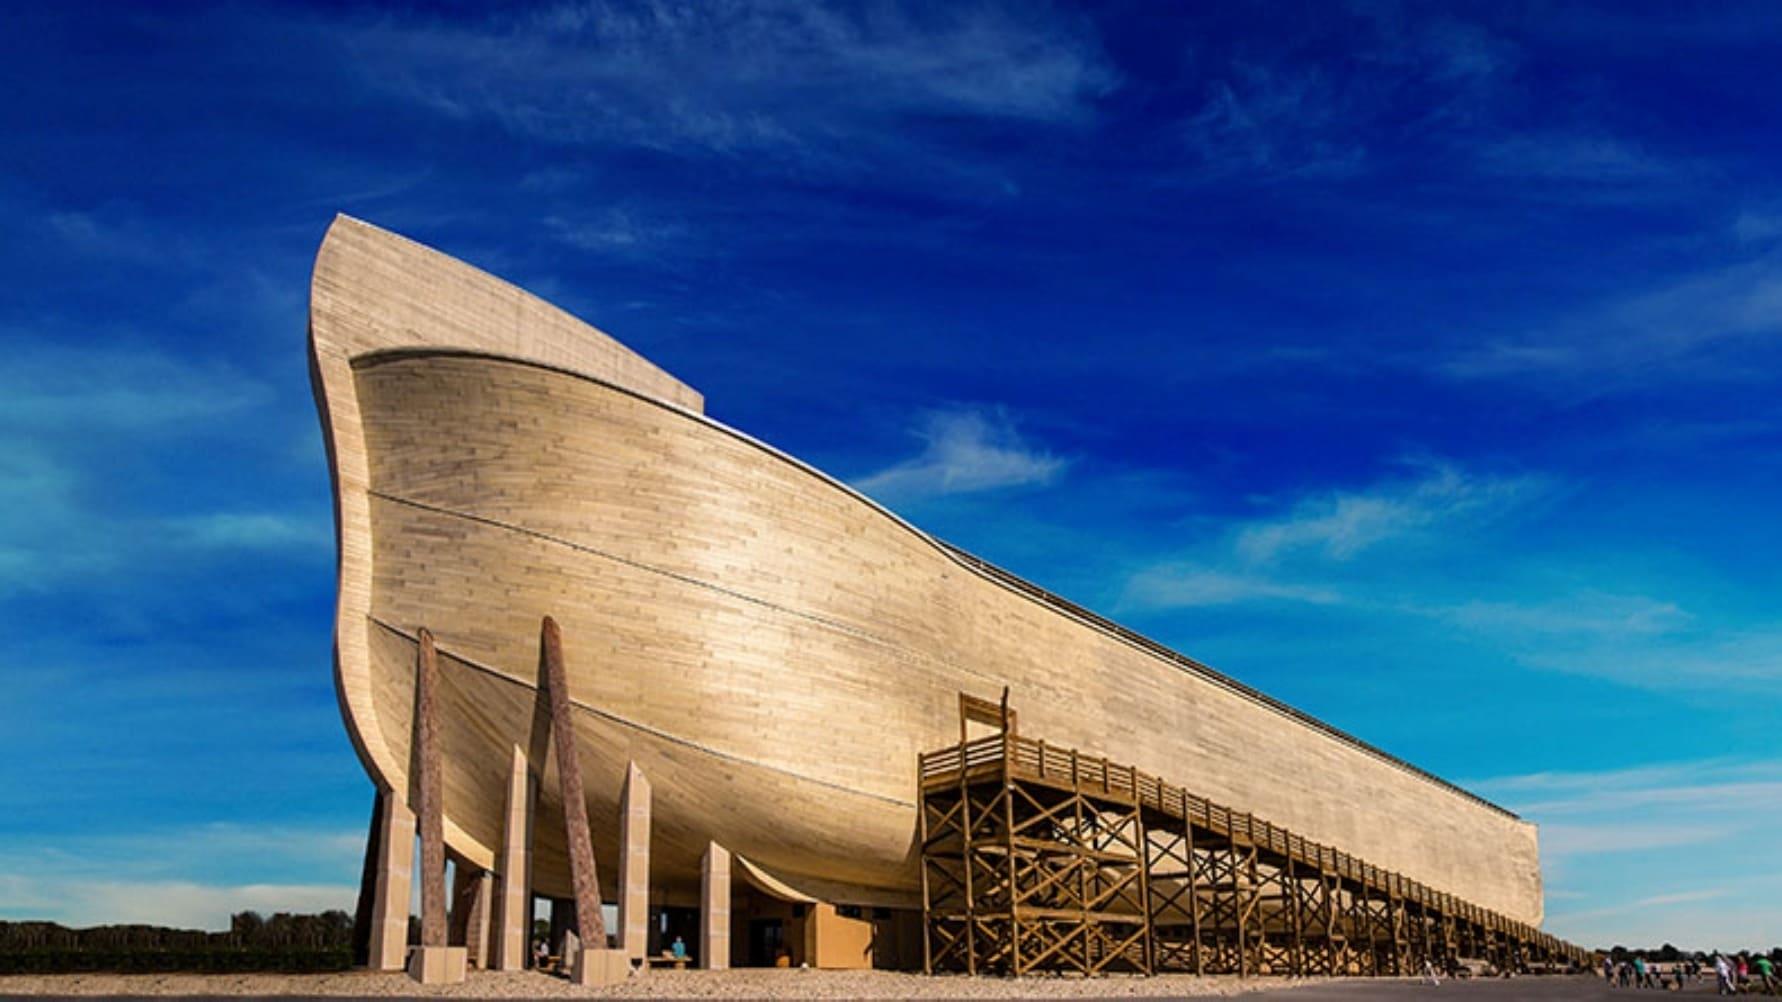 The Building of the Ark Encounter backdrop